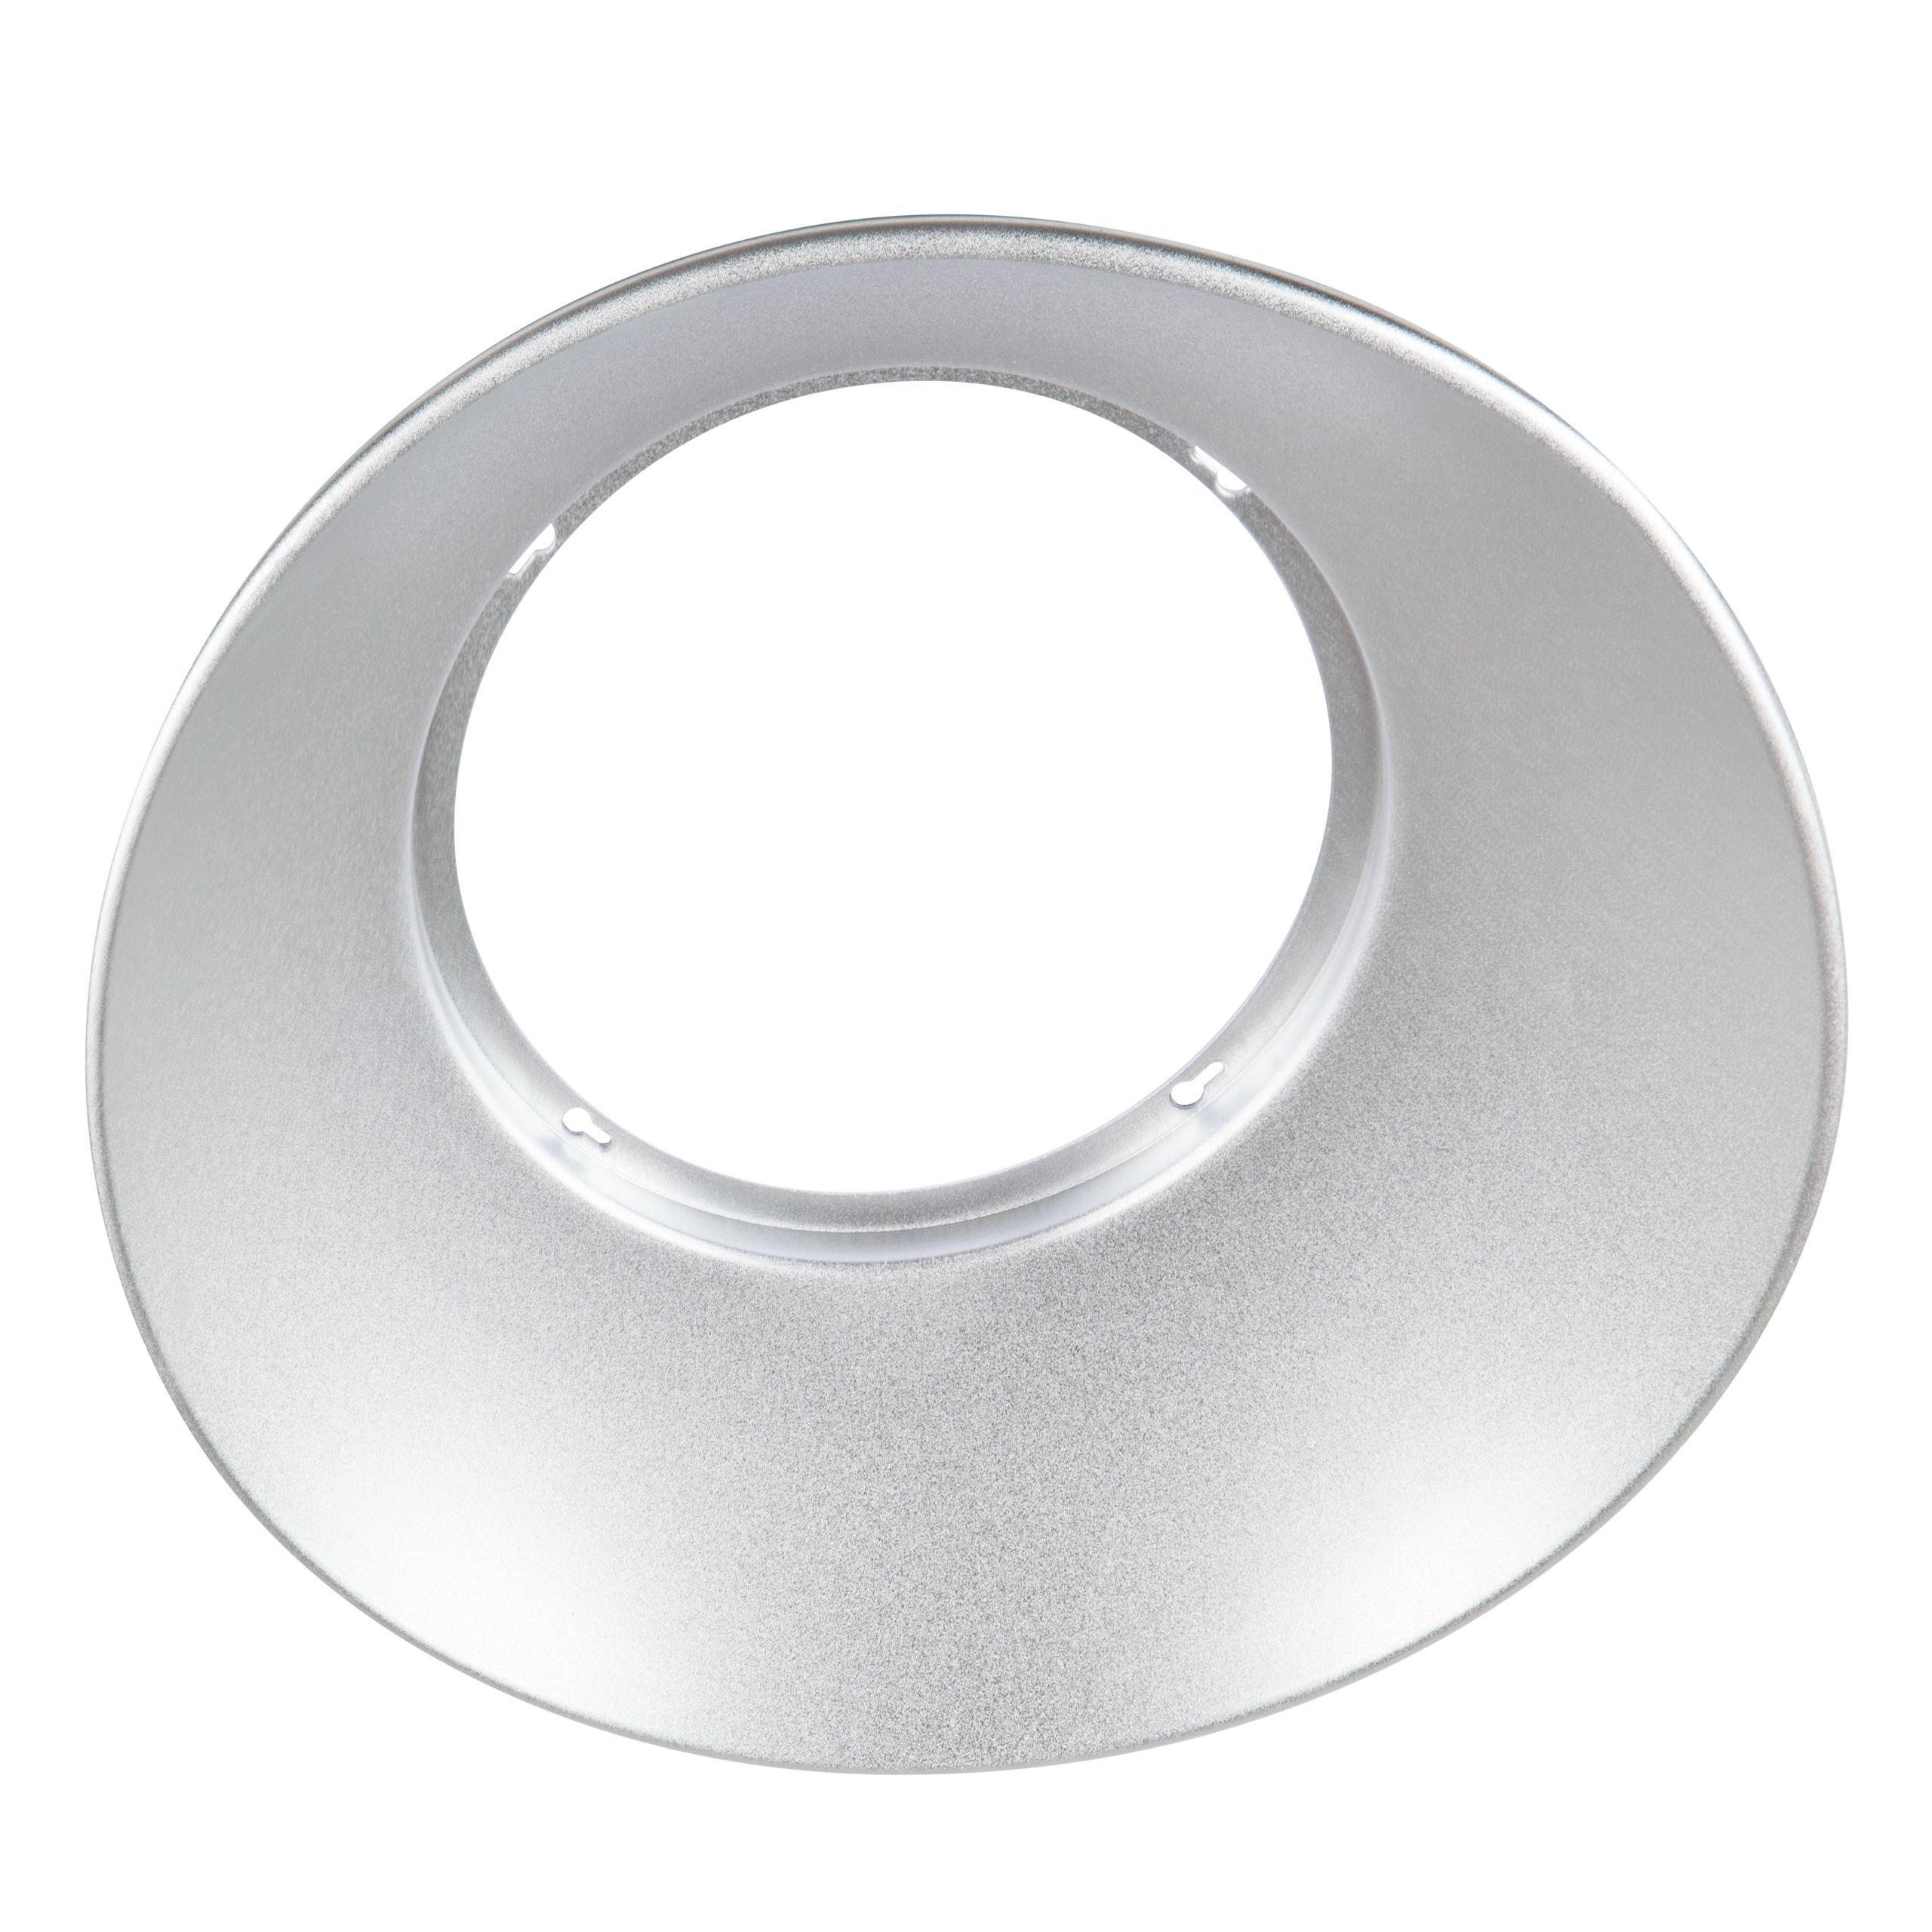 Osram Ceiling Type Round Lamp Light Clamp for LED Lamps, 500mm Fixing Hole Diameter